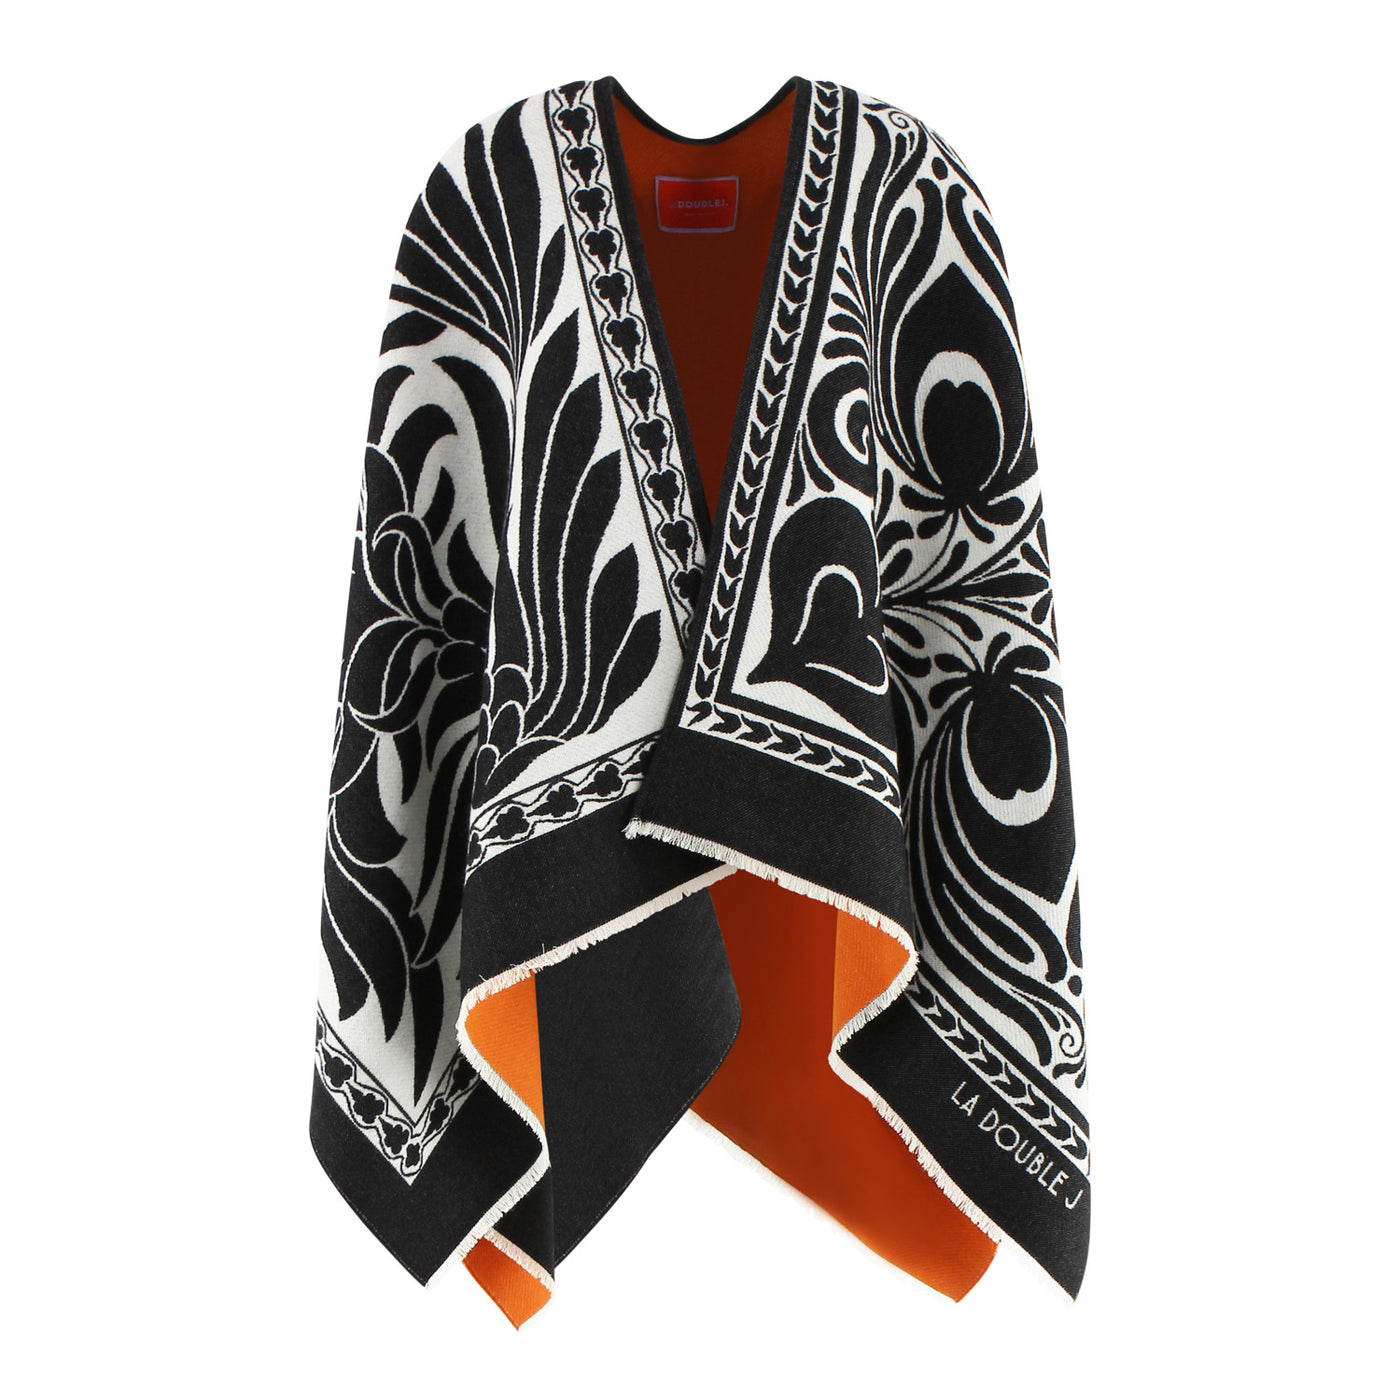 Poncho reversible aus Wolle